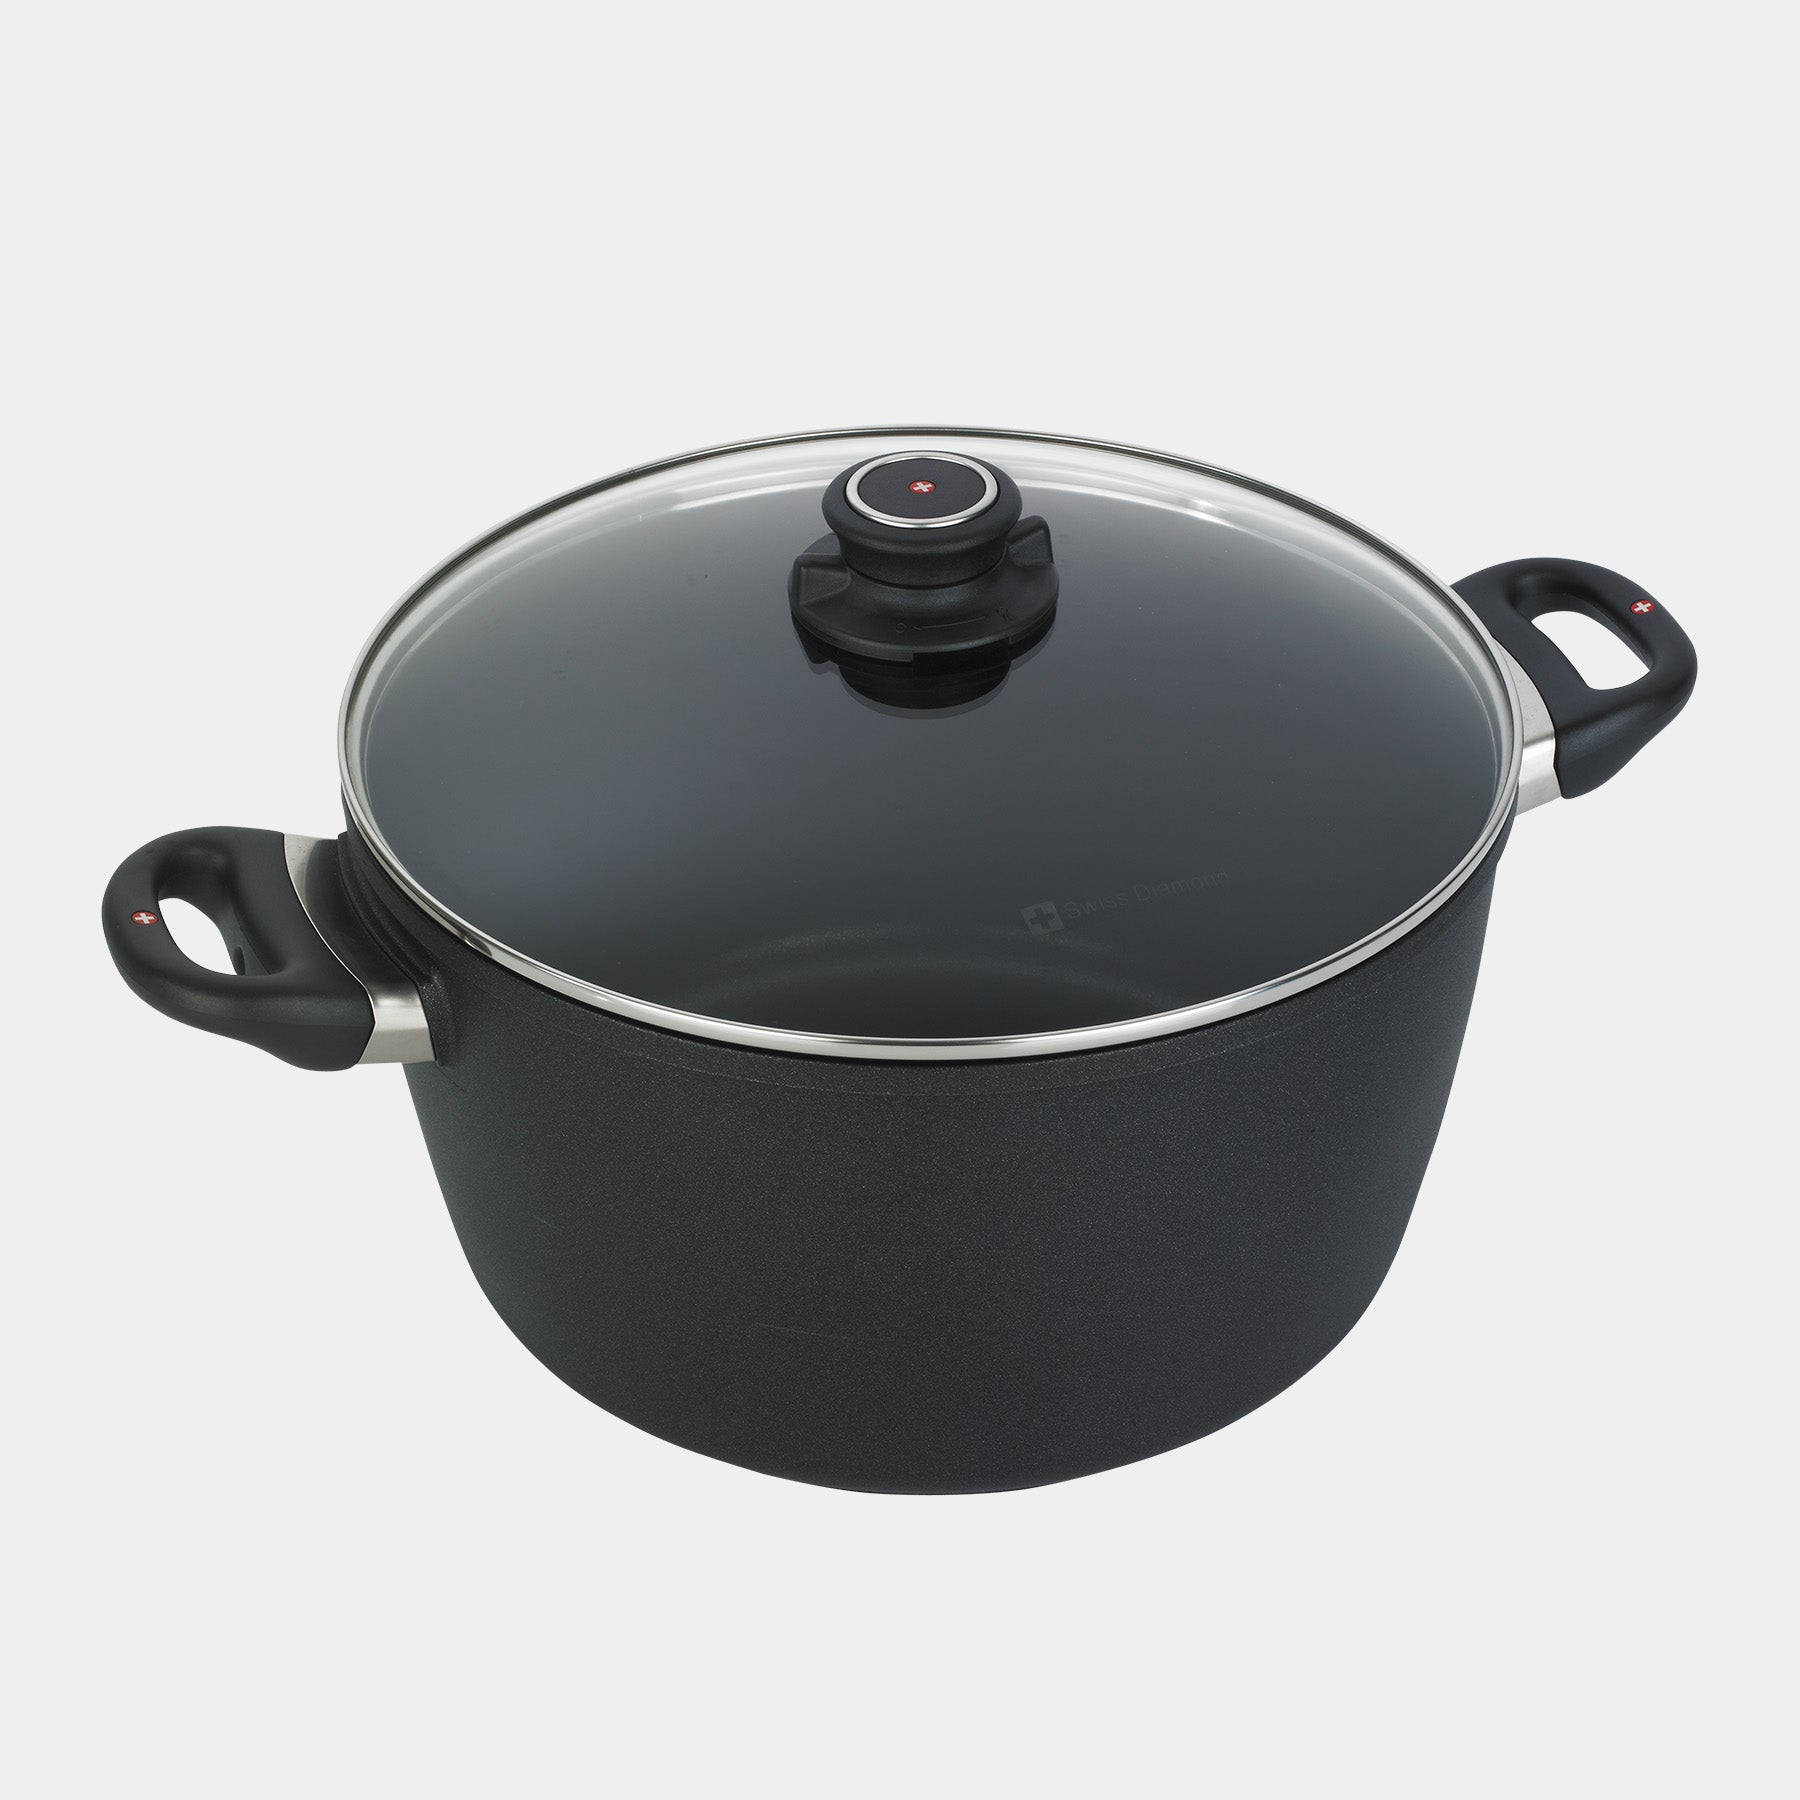 XD Nonstick 8.5 qt Stock Pot with Glass Lid - Induction top view